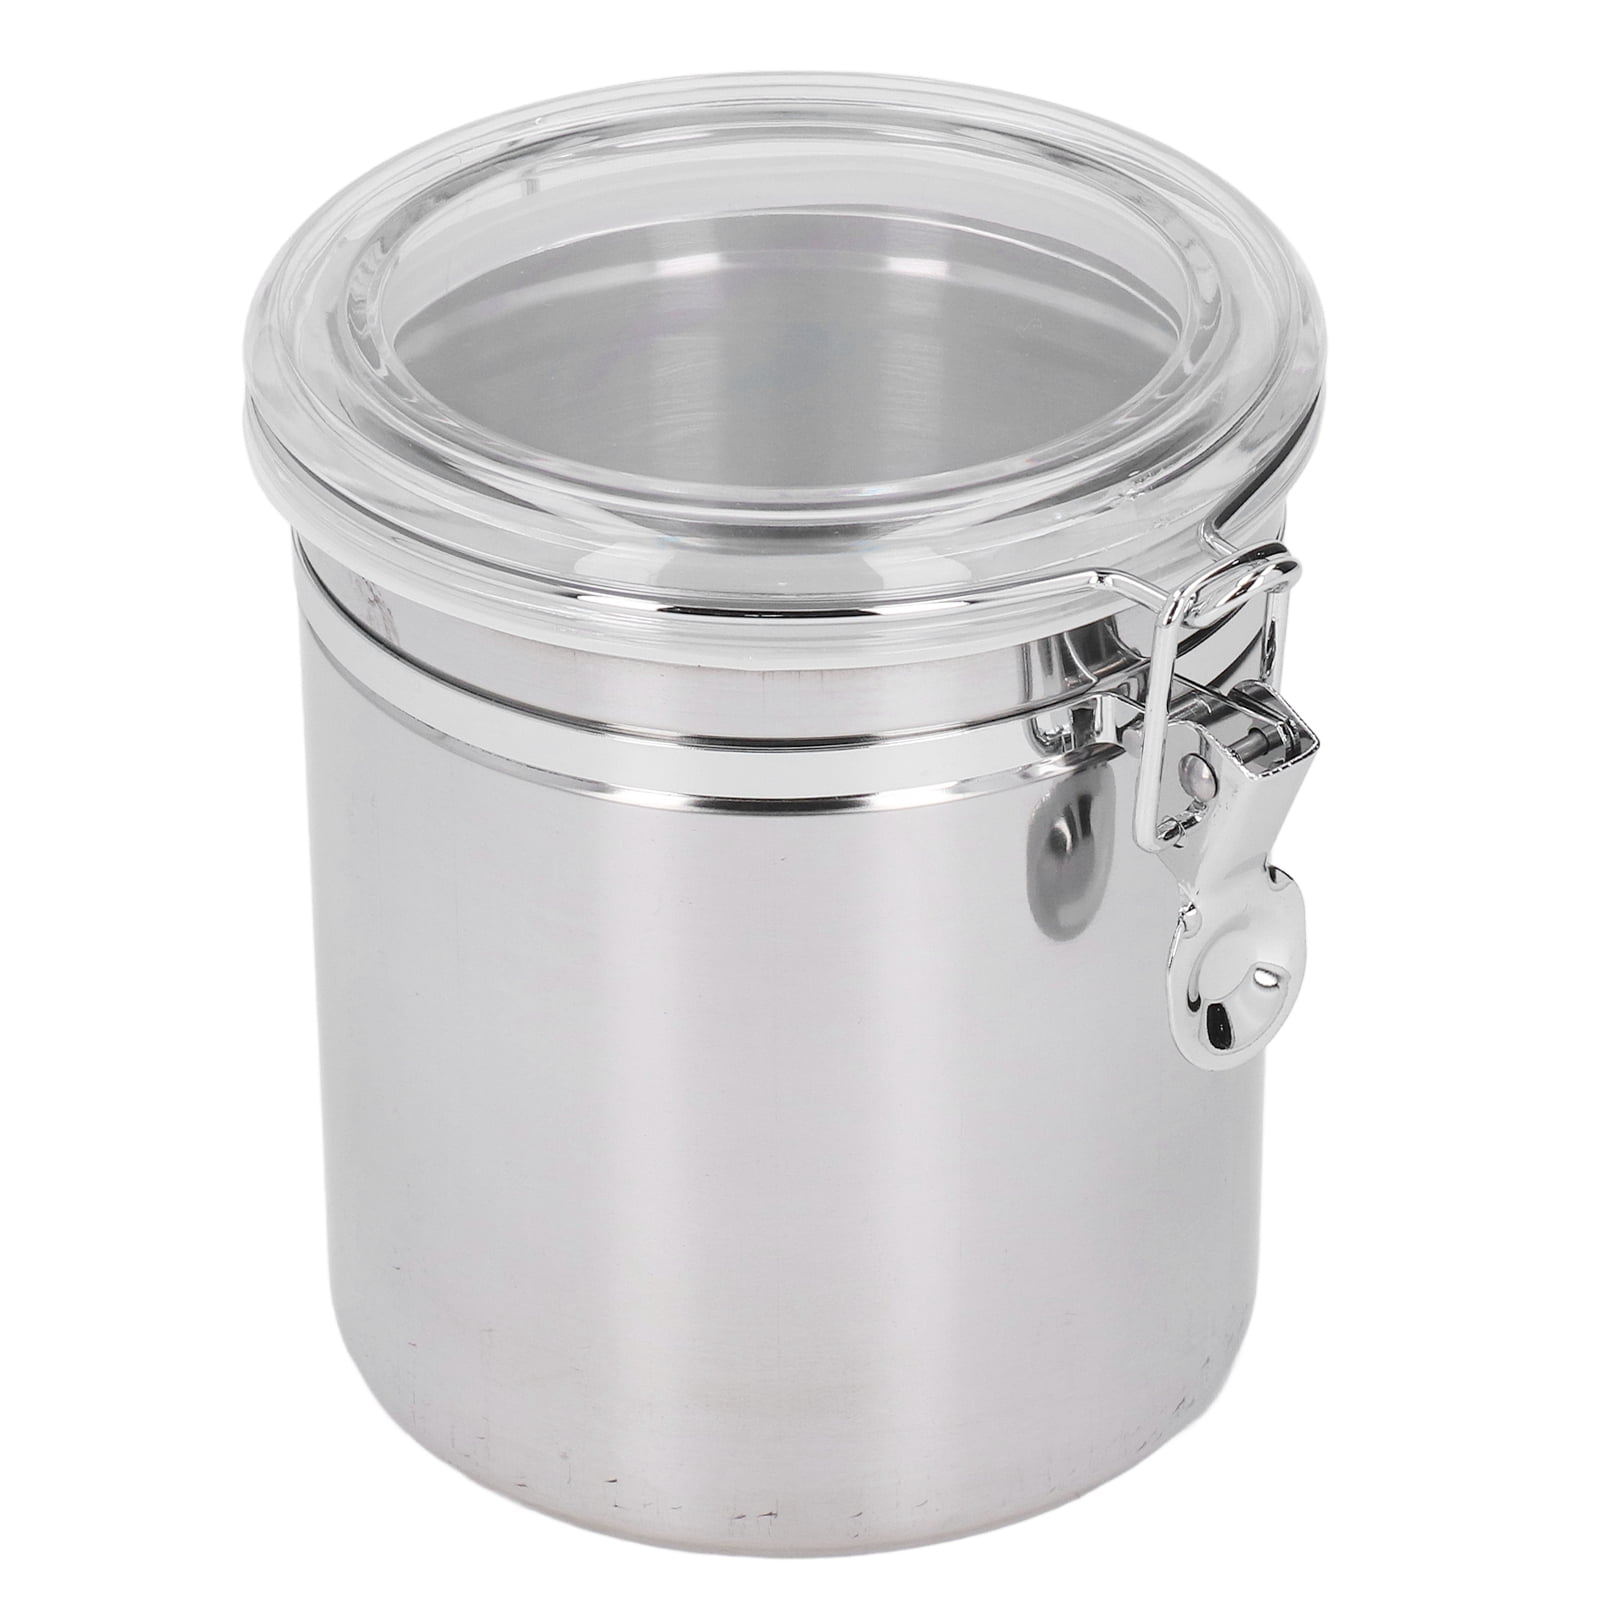 Basic Nature Stainless Steel Food Container - Food storage, Buy online